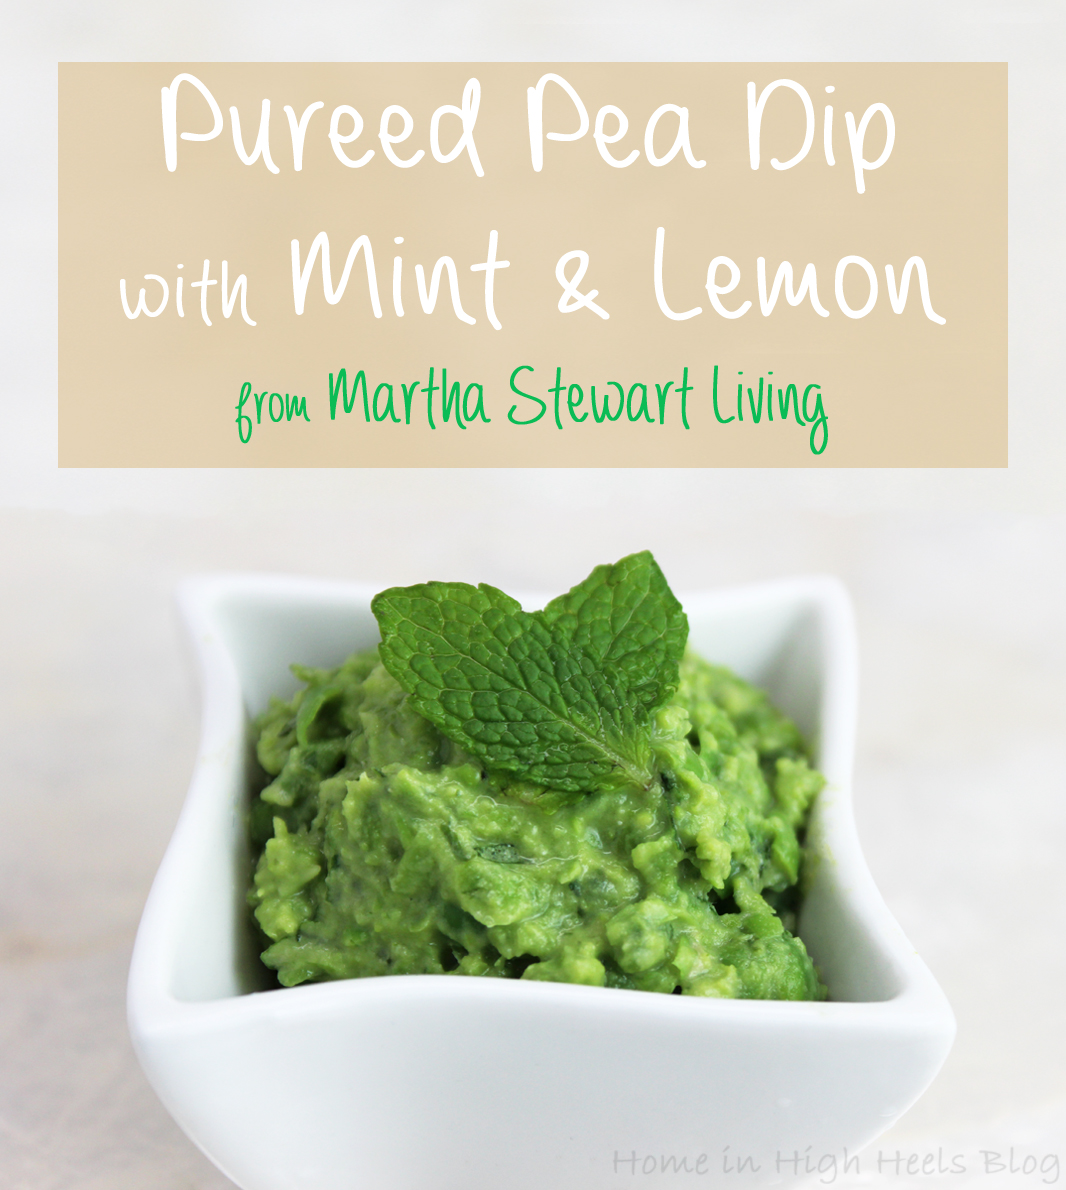 Pureed Pea Dip with Mint & Lemon Recipe from Martha Stewart Living on Home in High Heels